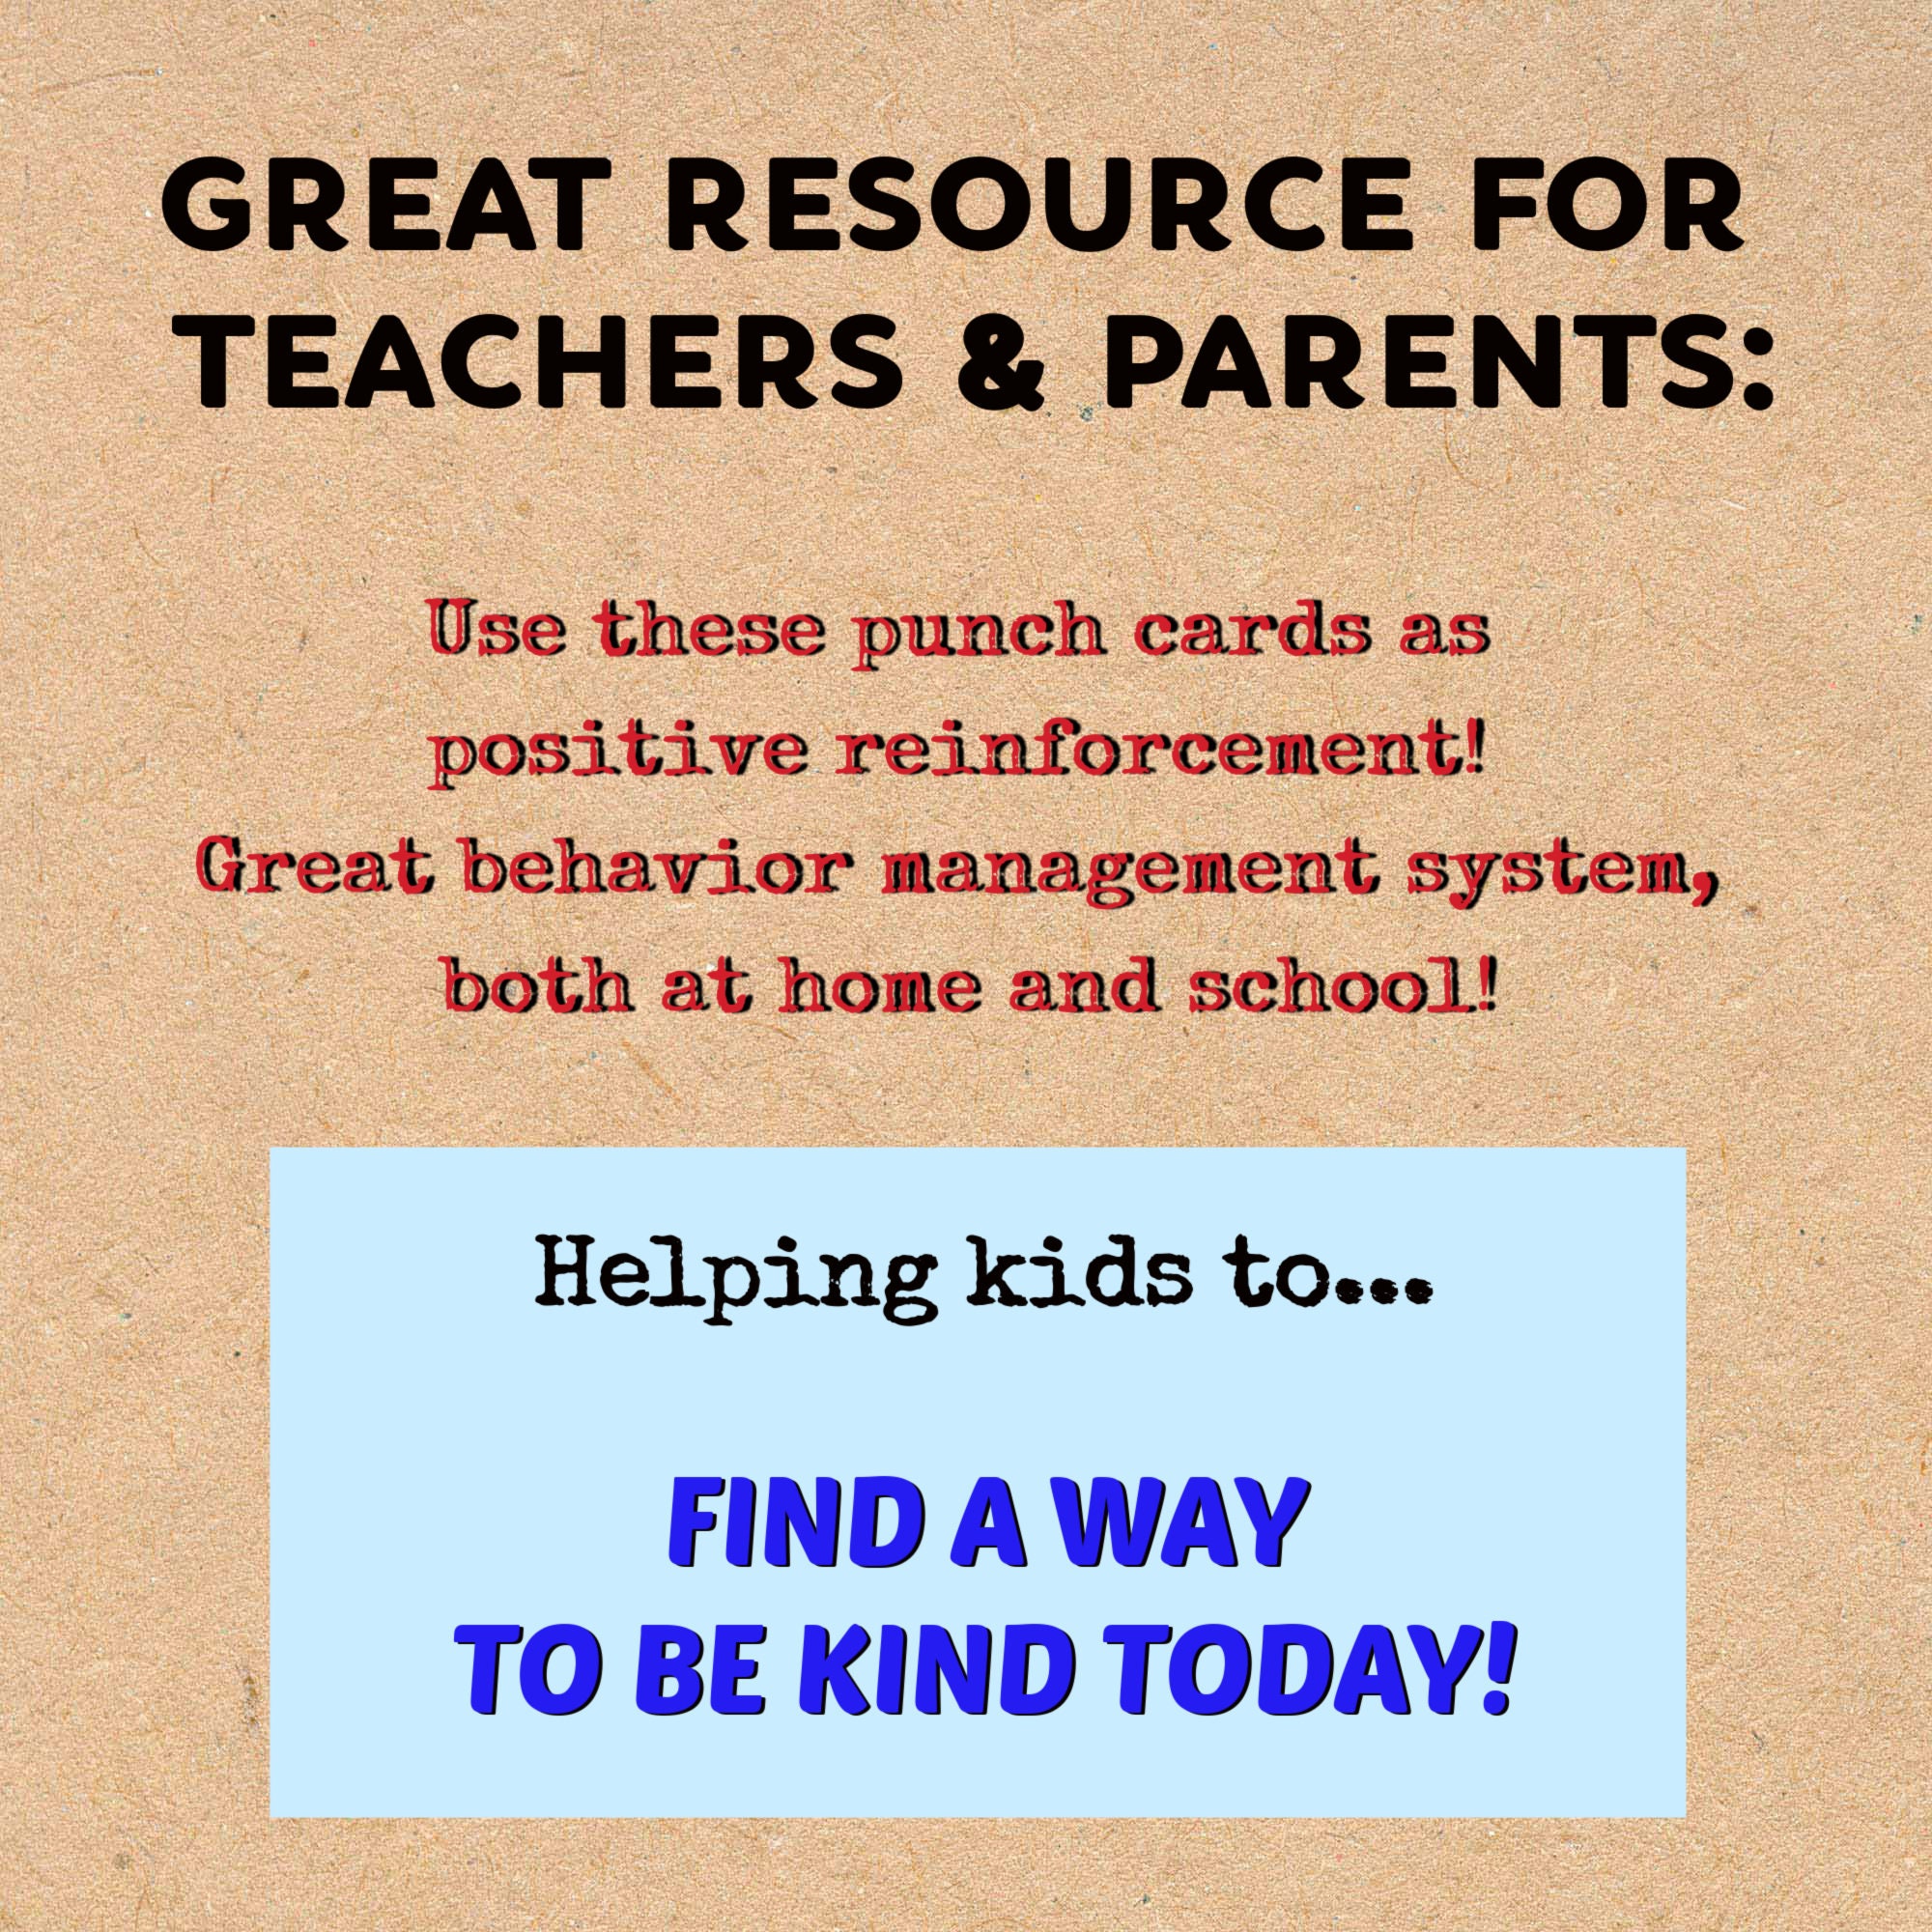 Children's Positive Reinforcement Punch Card – Simplified by Print